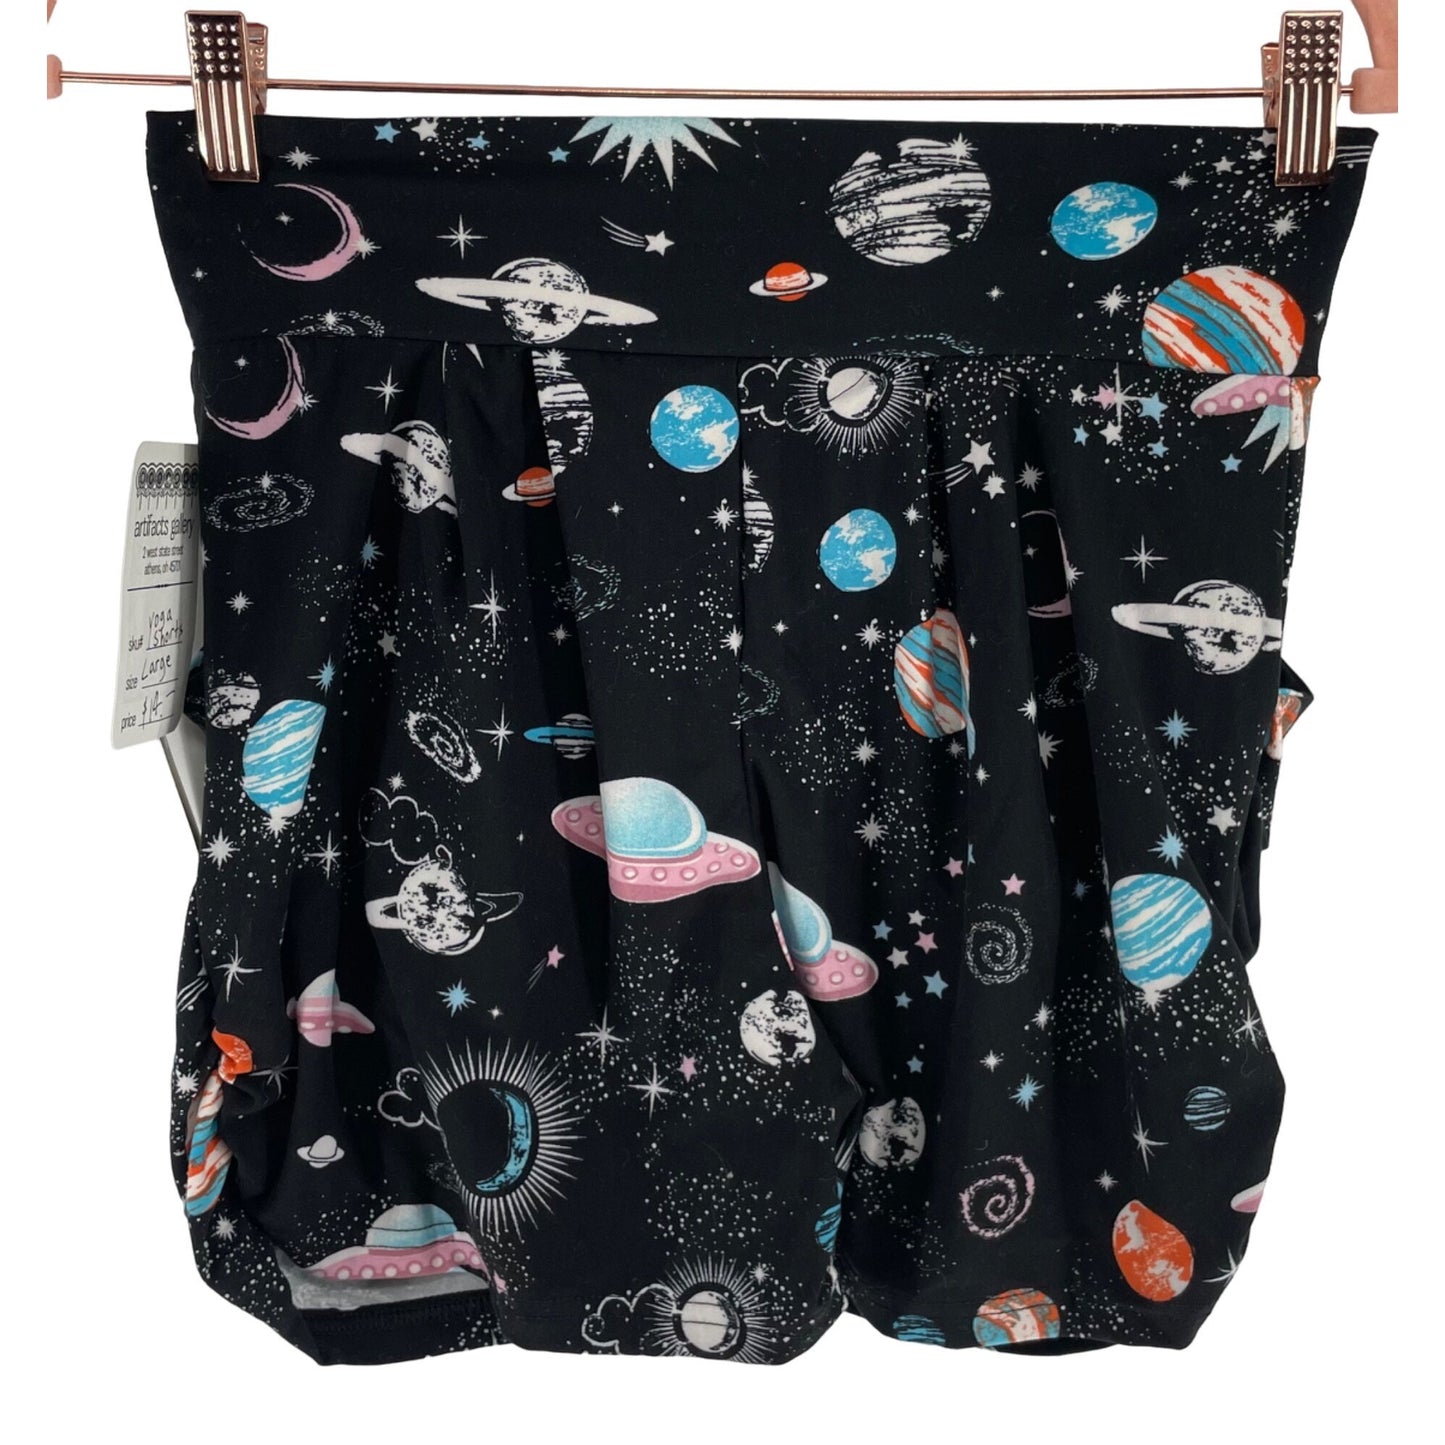 Leggings Depot NWT Women's Size Large Black & Multi-Colored Outer Space Yoga Shorts